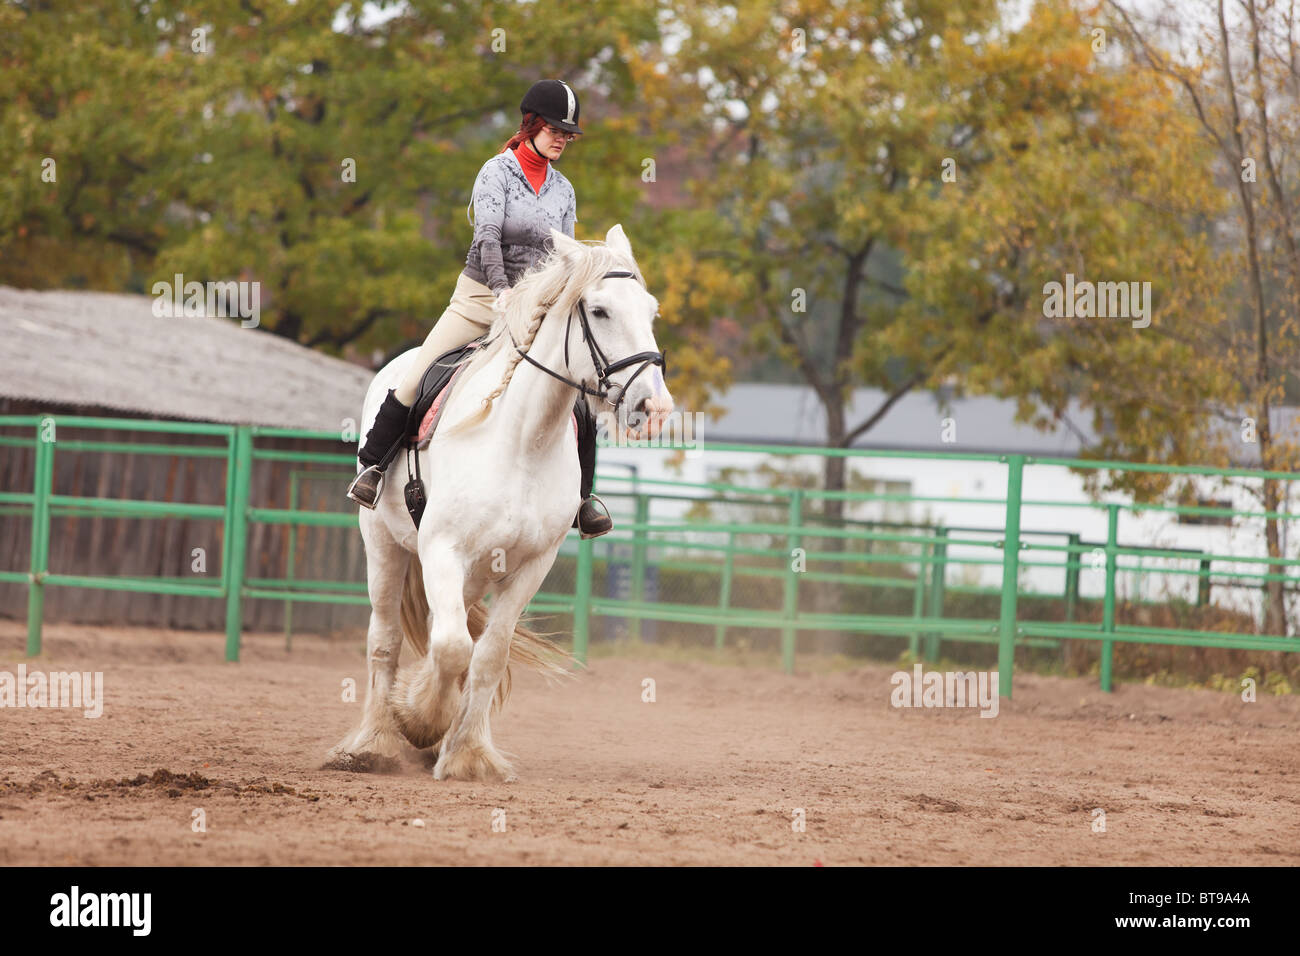 Young woman riding shire horse in arena Stock Photo